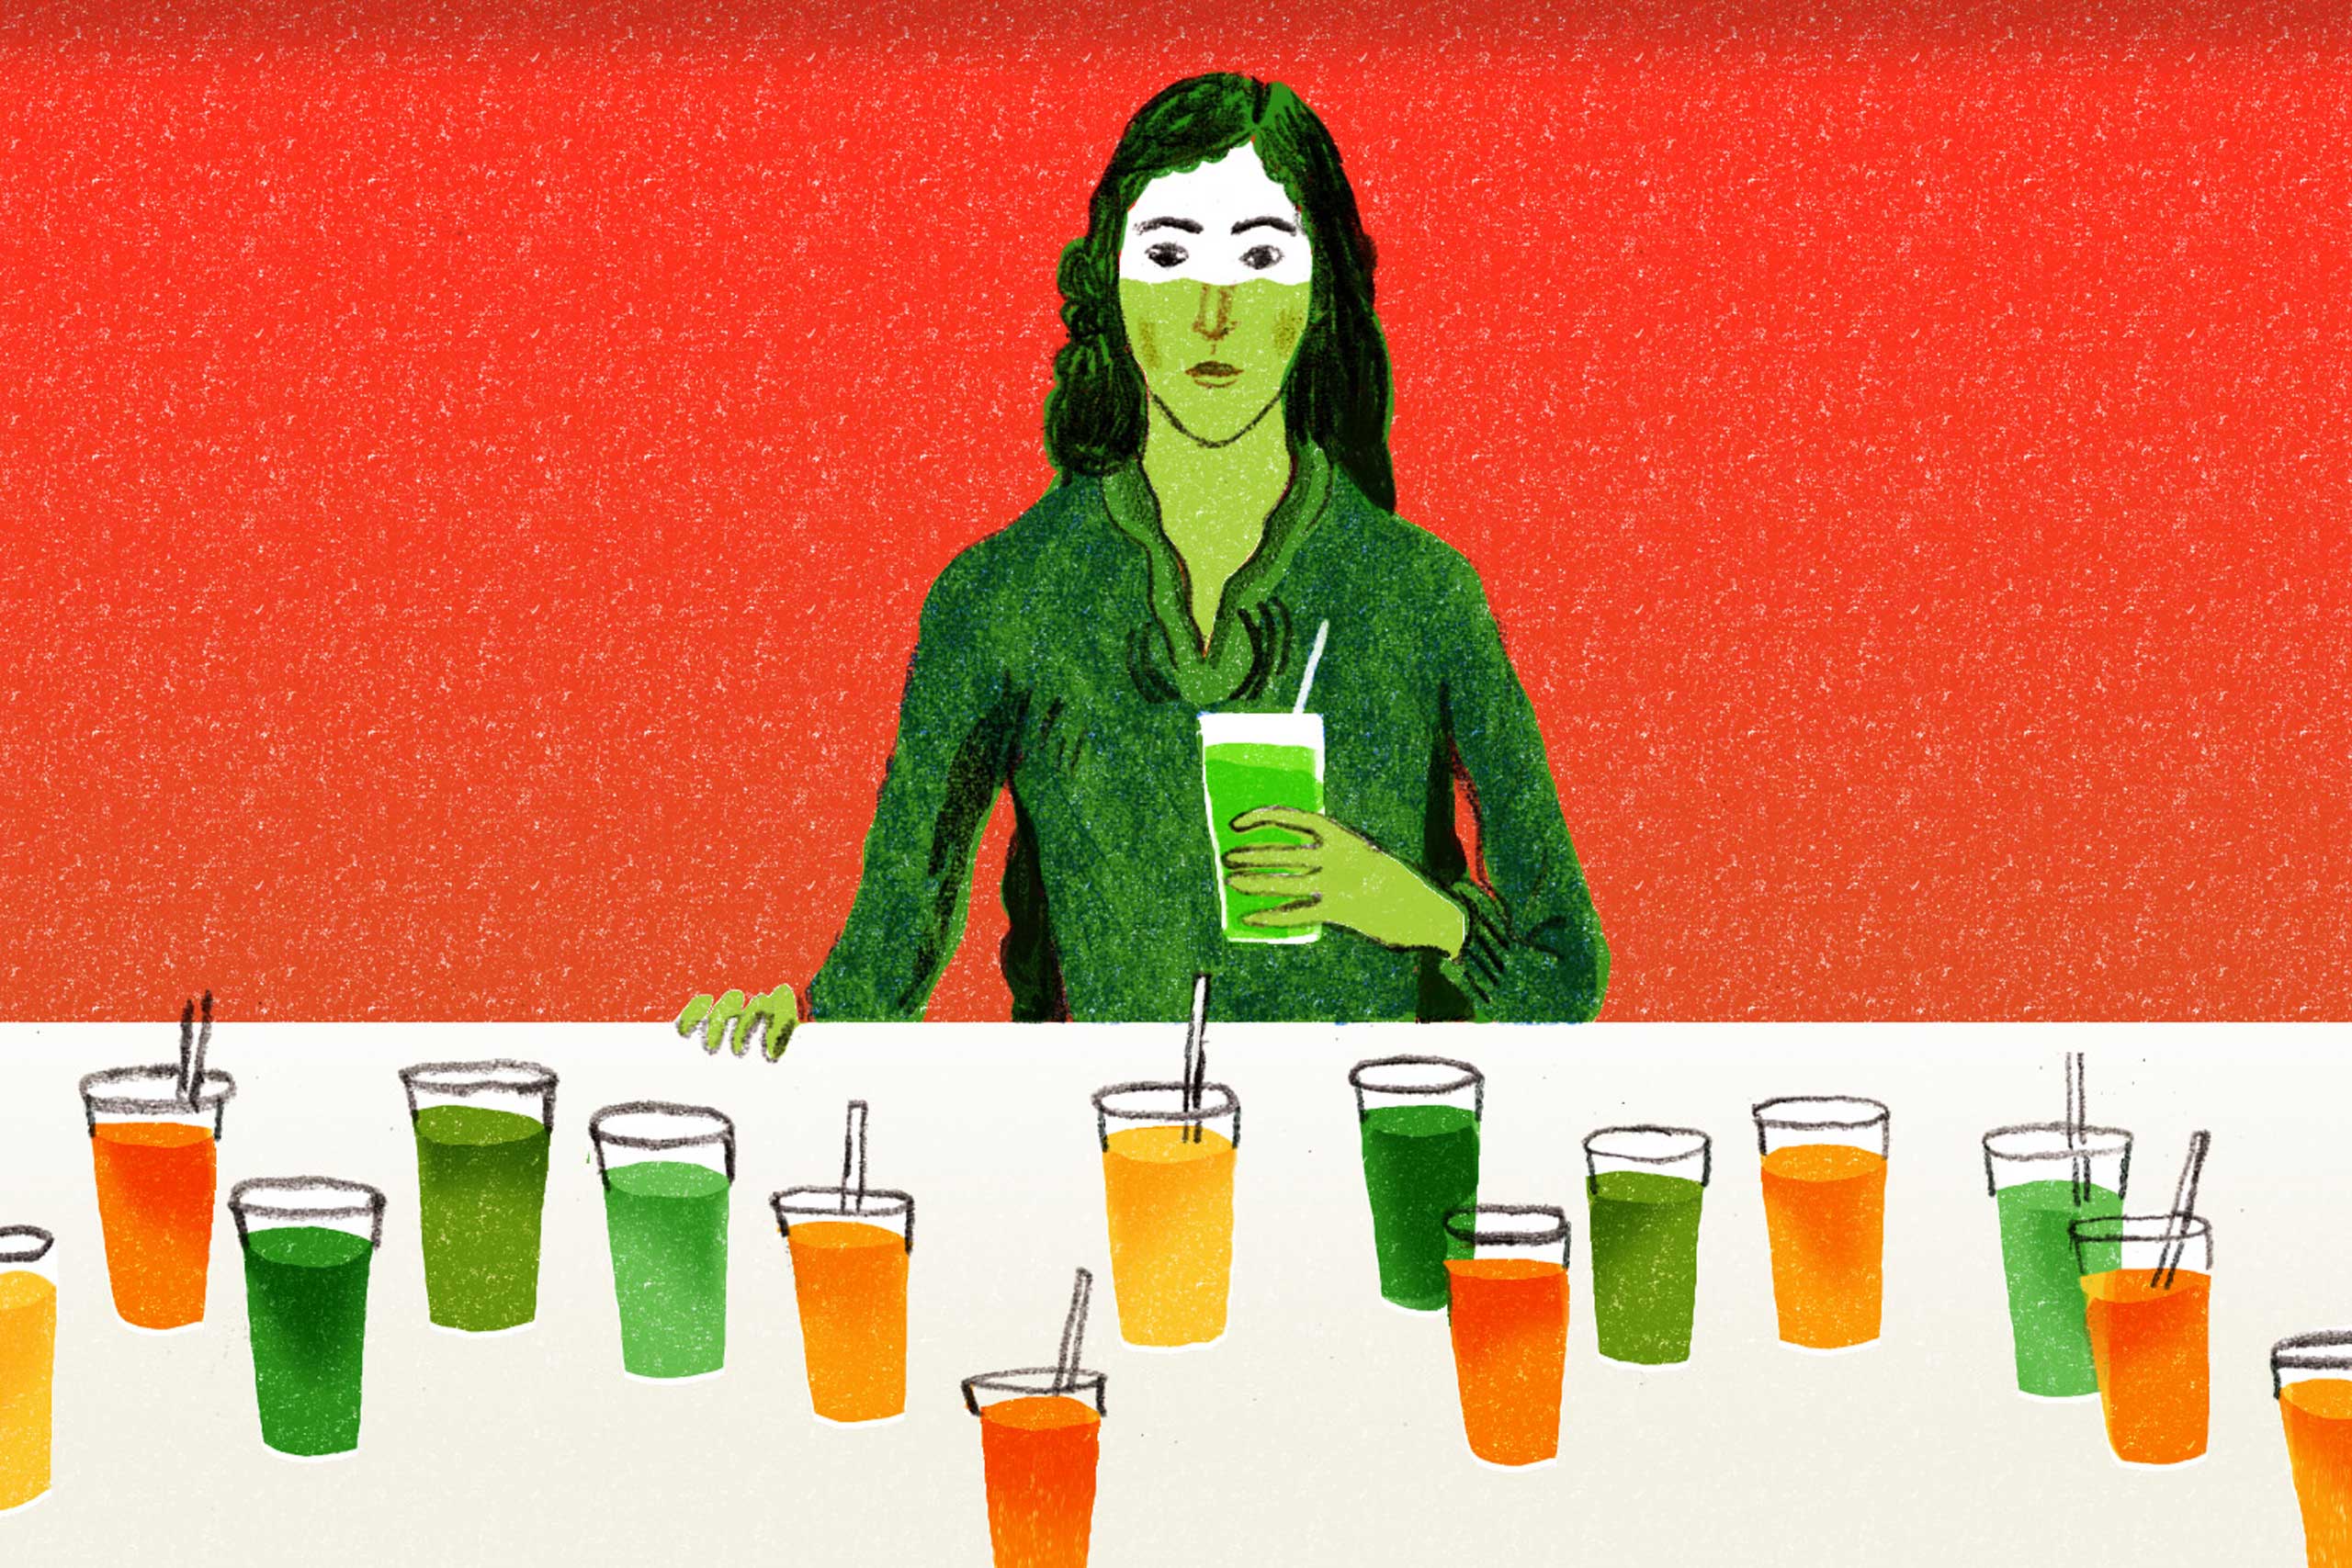 <strong><a href="http://time.com/3656242/cleanses-healthy/" target="_blank">You Asked: Are Cleanses Healthy?</a></strong>   Potions that claim to clear your body of toxins might sound alluring, but do they deliver? (Illustration by Peter Oumanski for TIME)